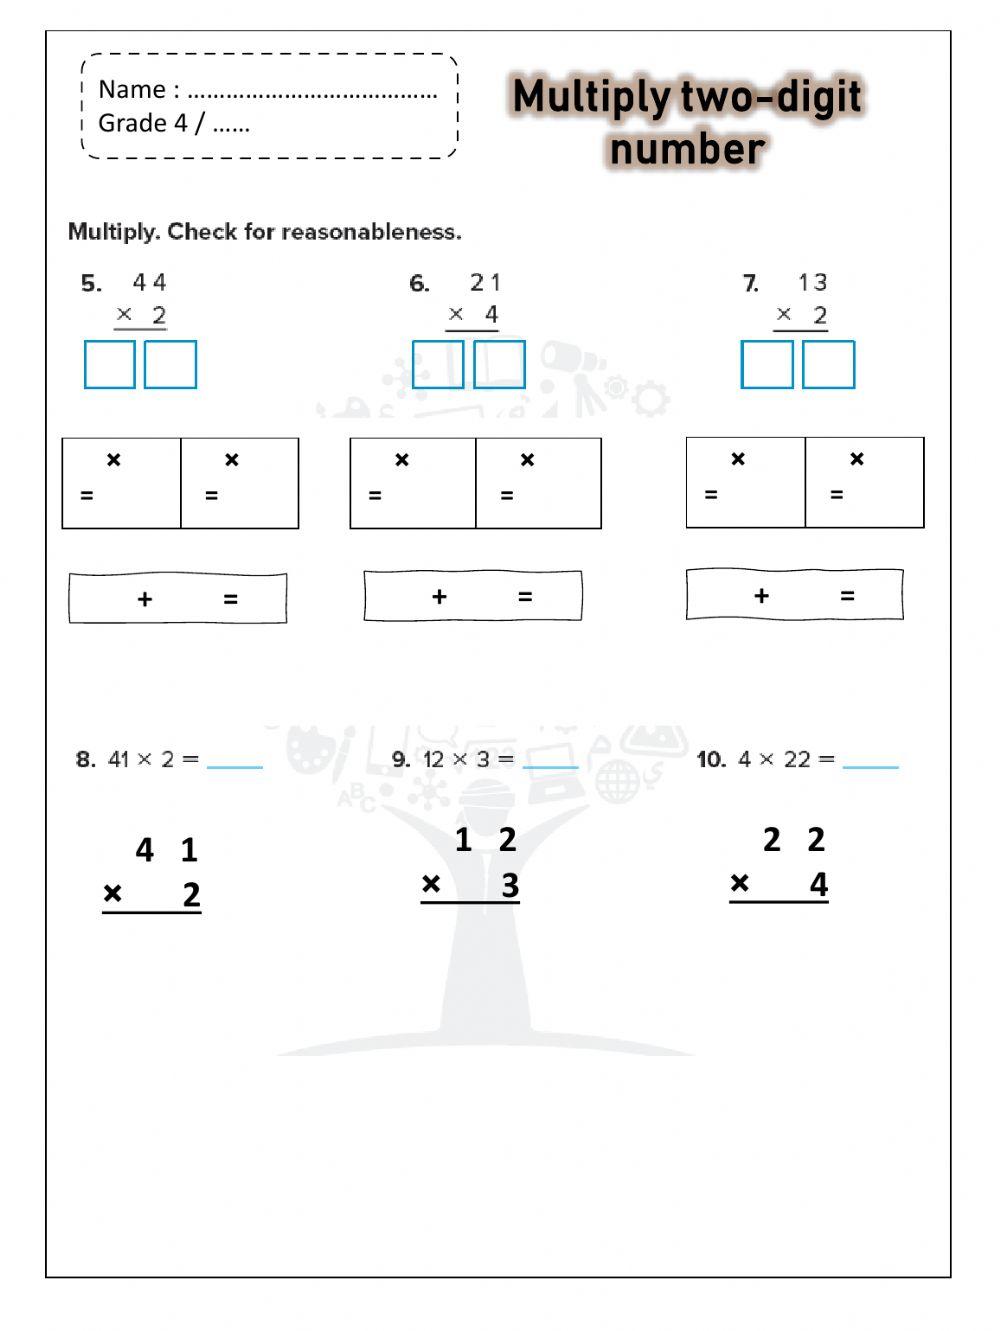 Multiply two-digit numbers